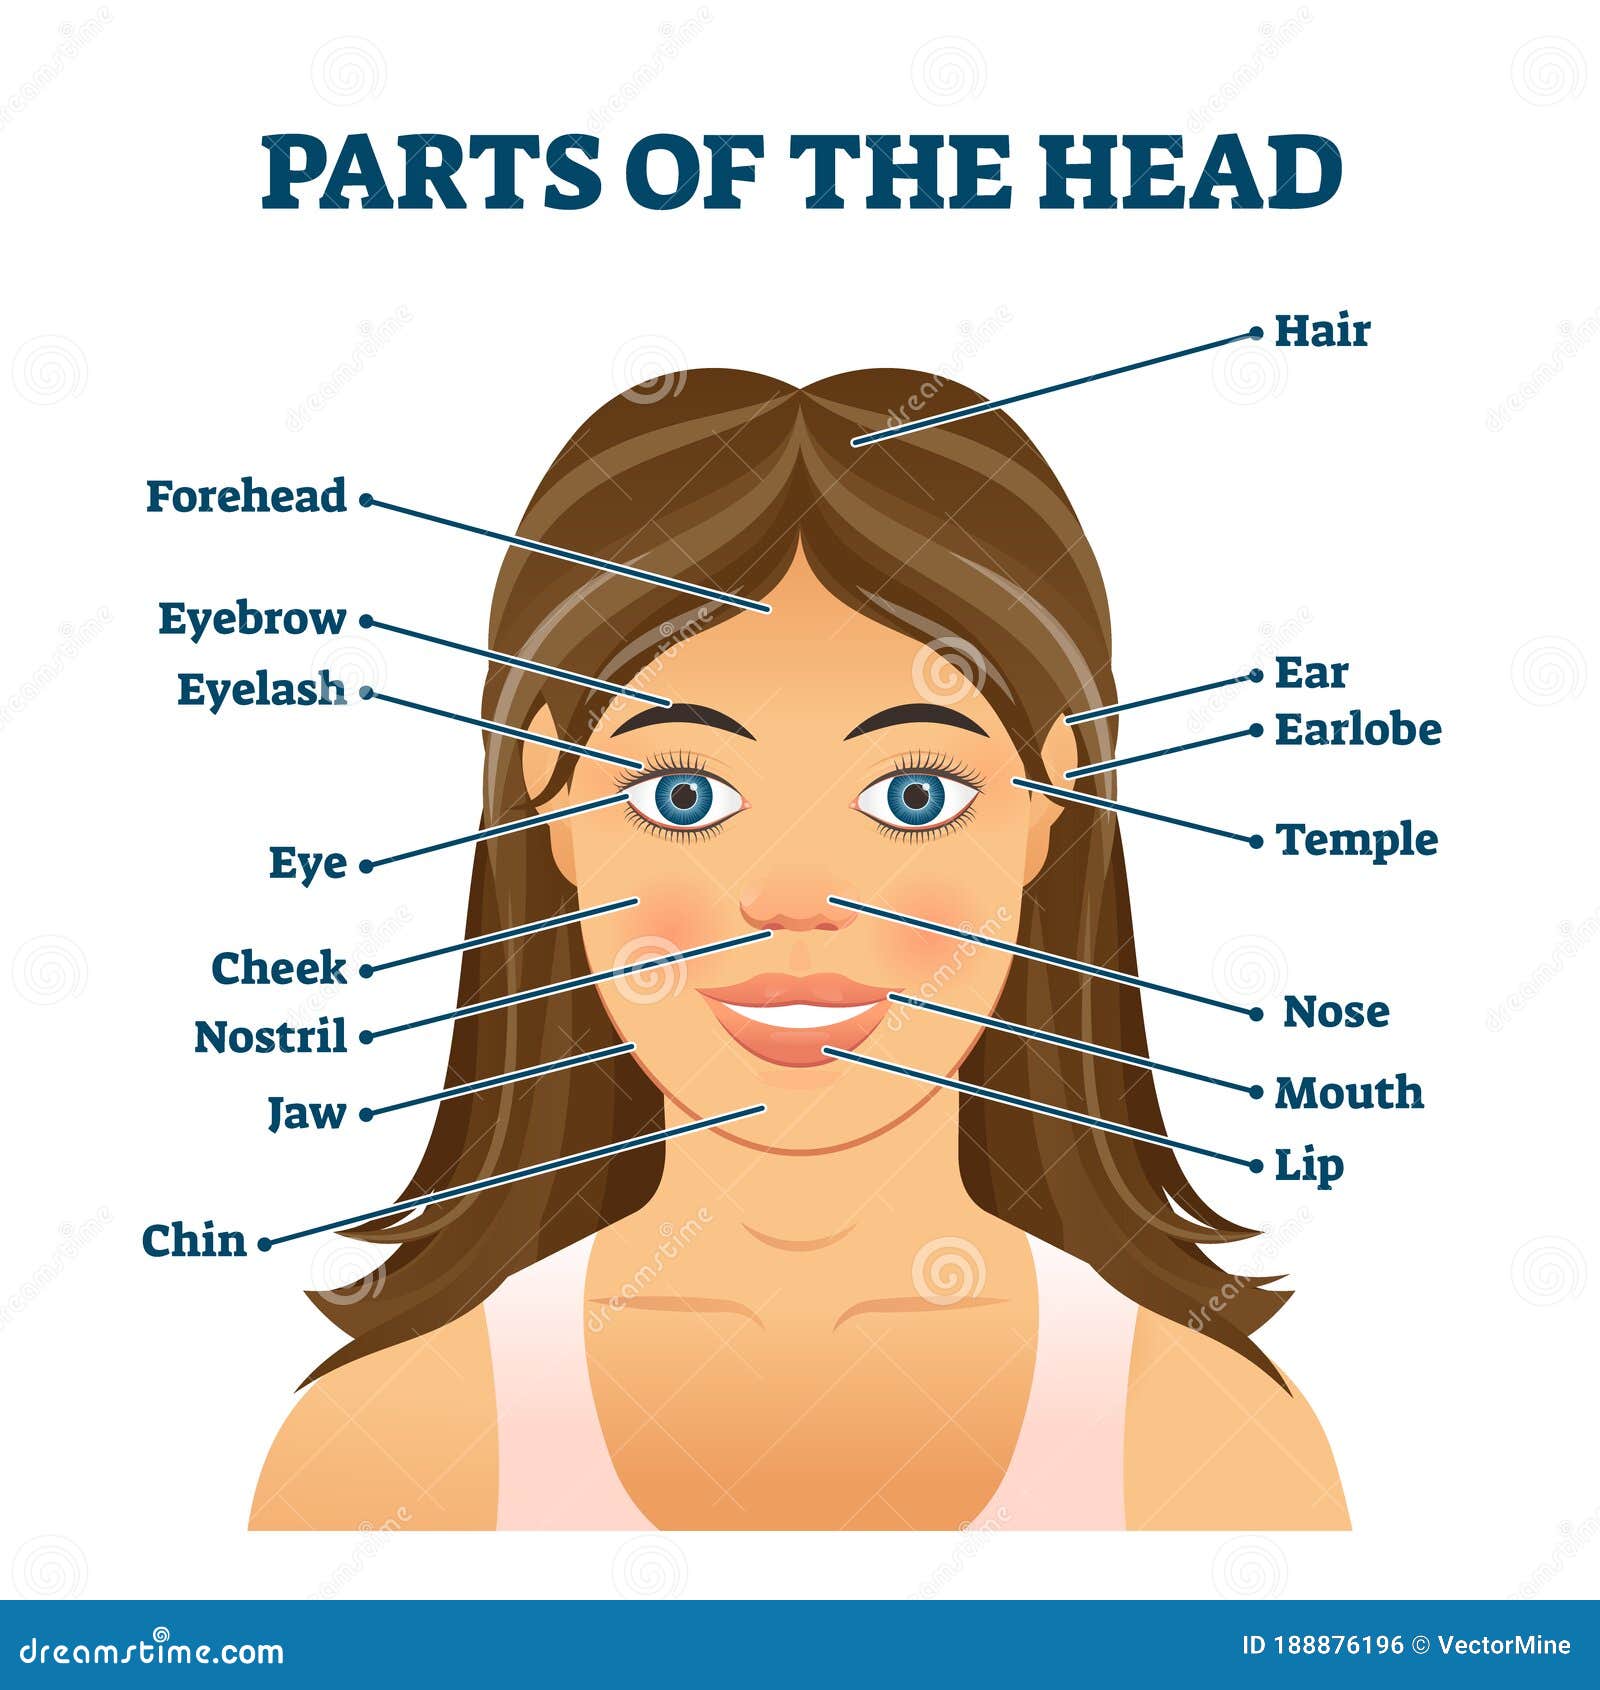 parts-of-the-head-for-english-vocabulary-words-education-vector-illustration-stock-vector